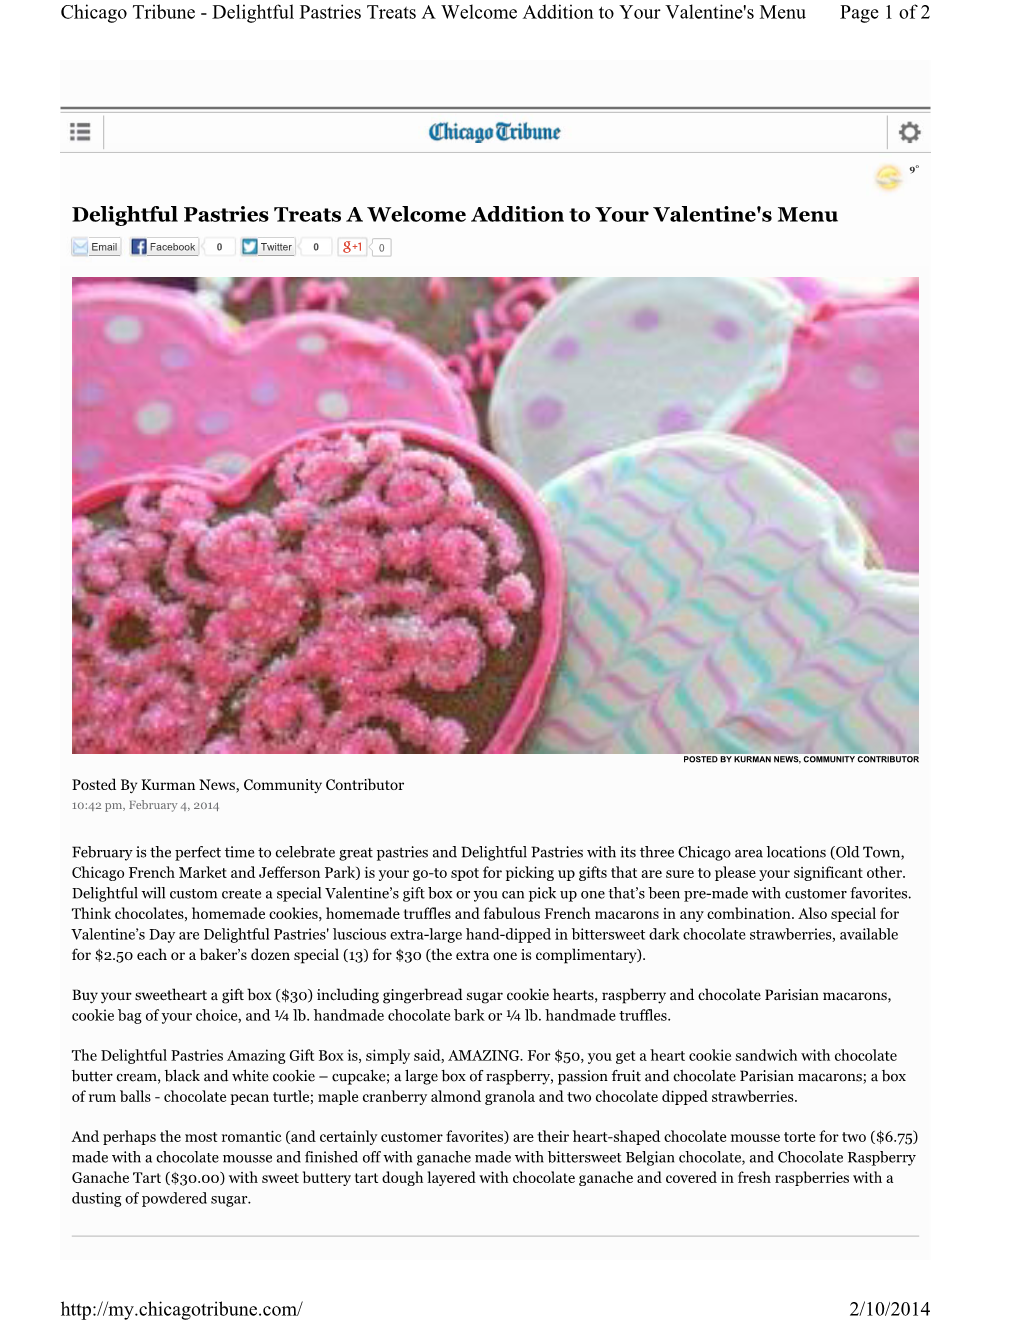 Delightful Pastries Treats a Welcome Addition to Your Valentine's Menu Page 1 of 2